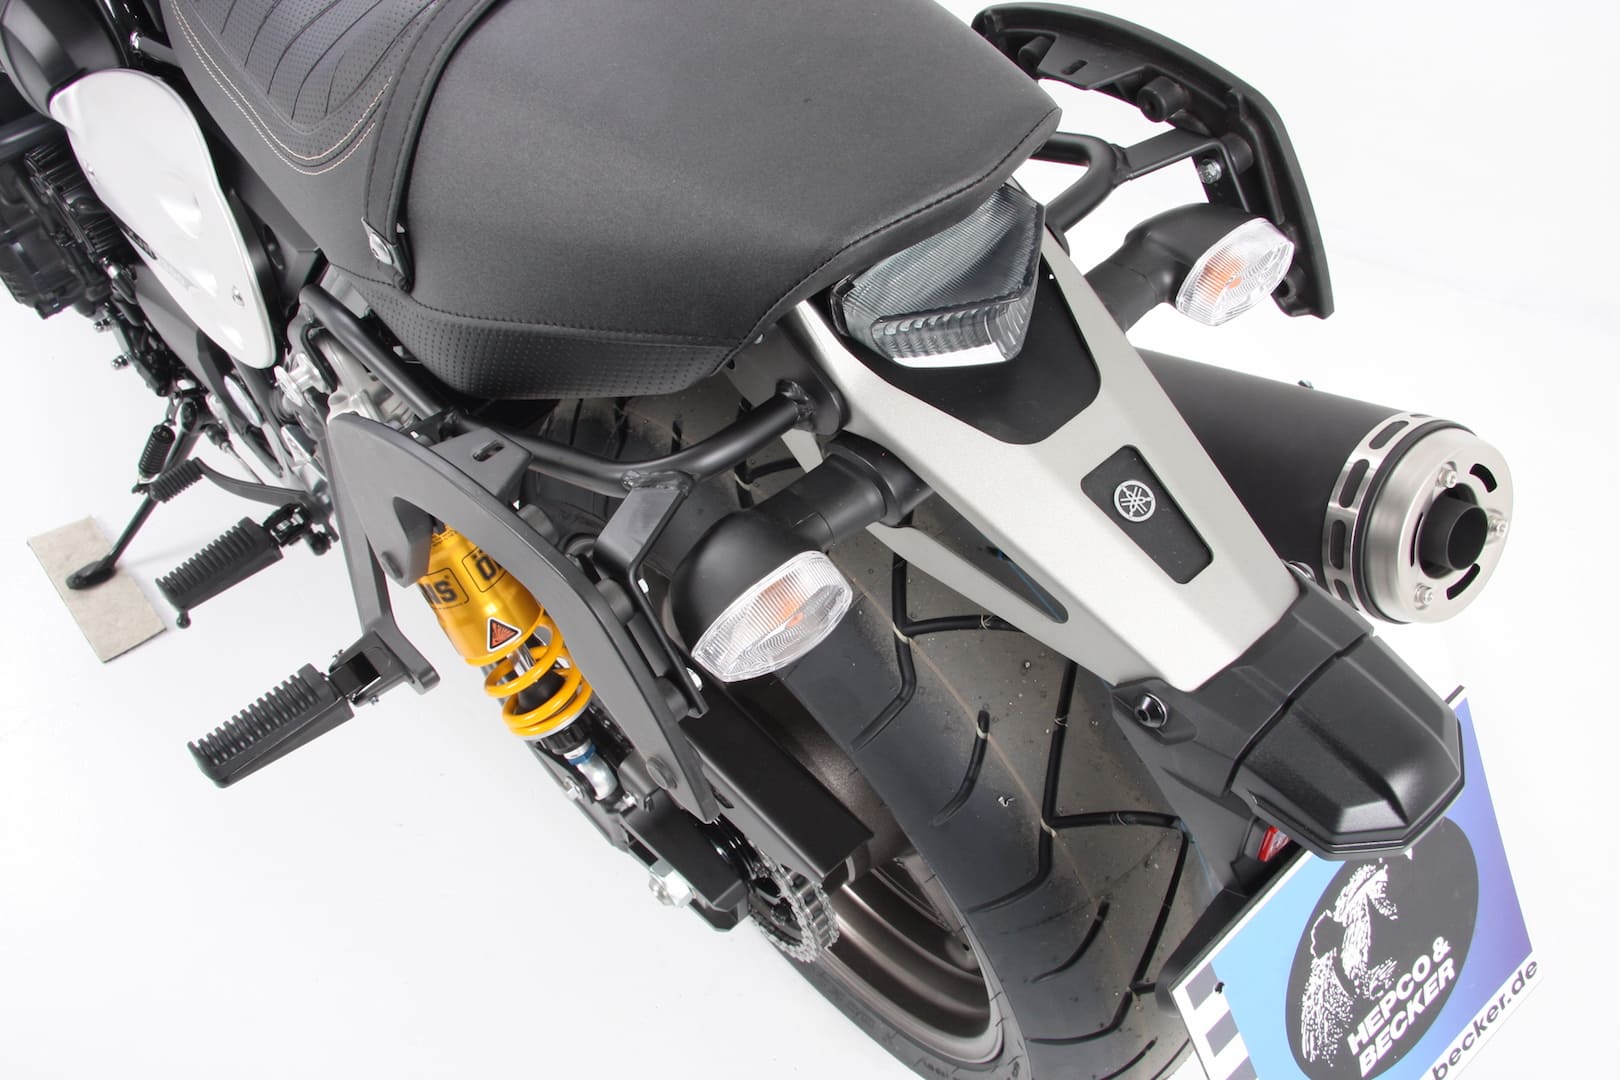 C-Bow sidecarrier for Yamaha XJR 1300 (2015-2016)